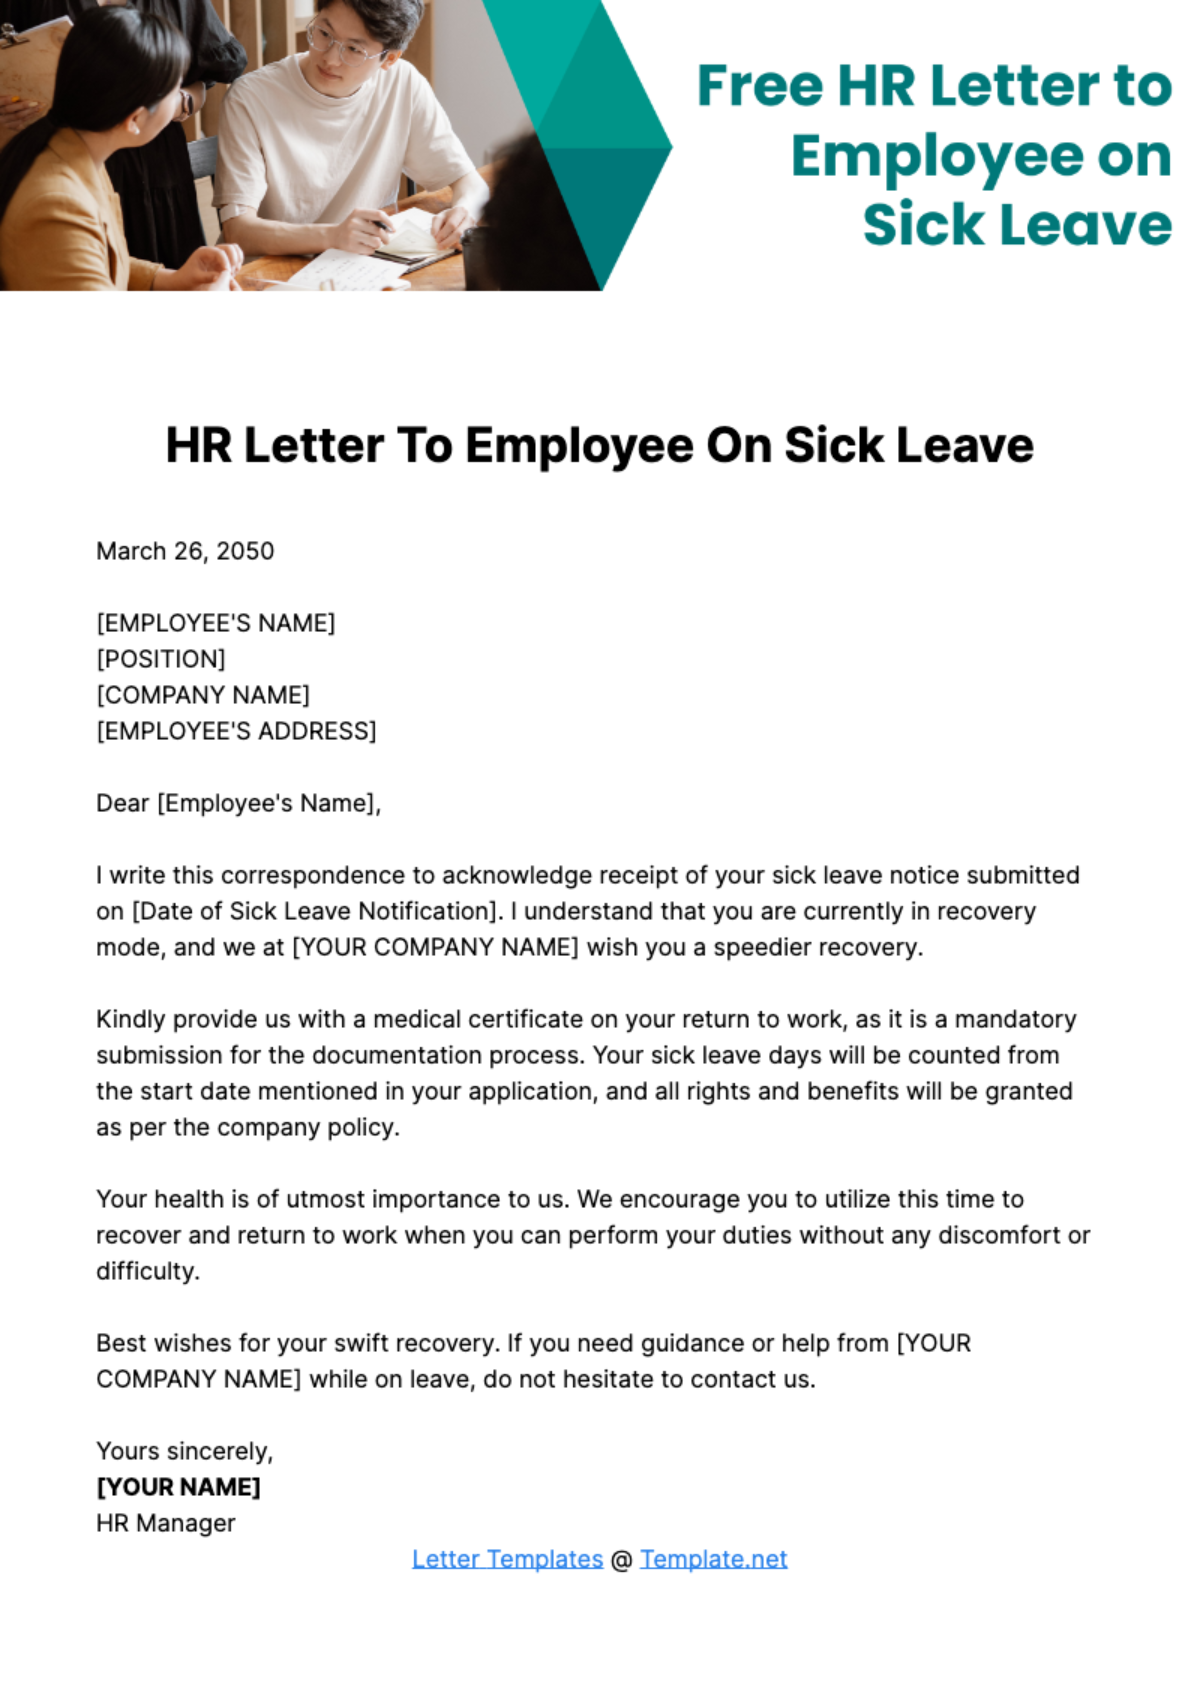 Free HR Letter to Employee on Sick Leave Template